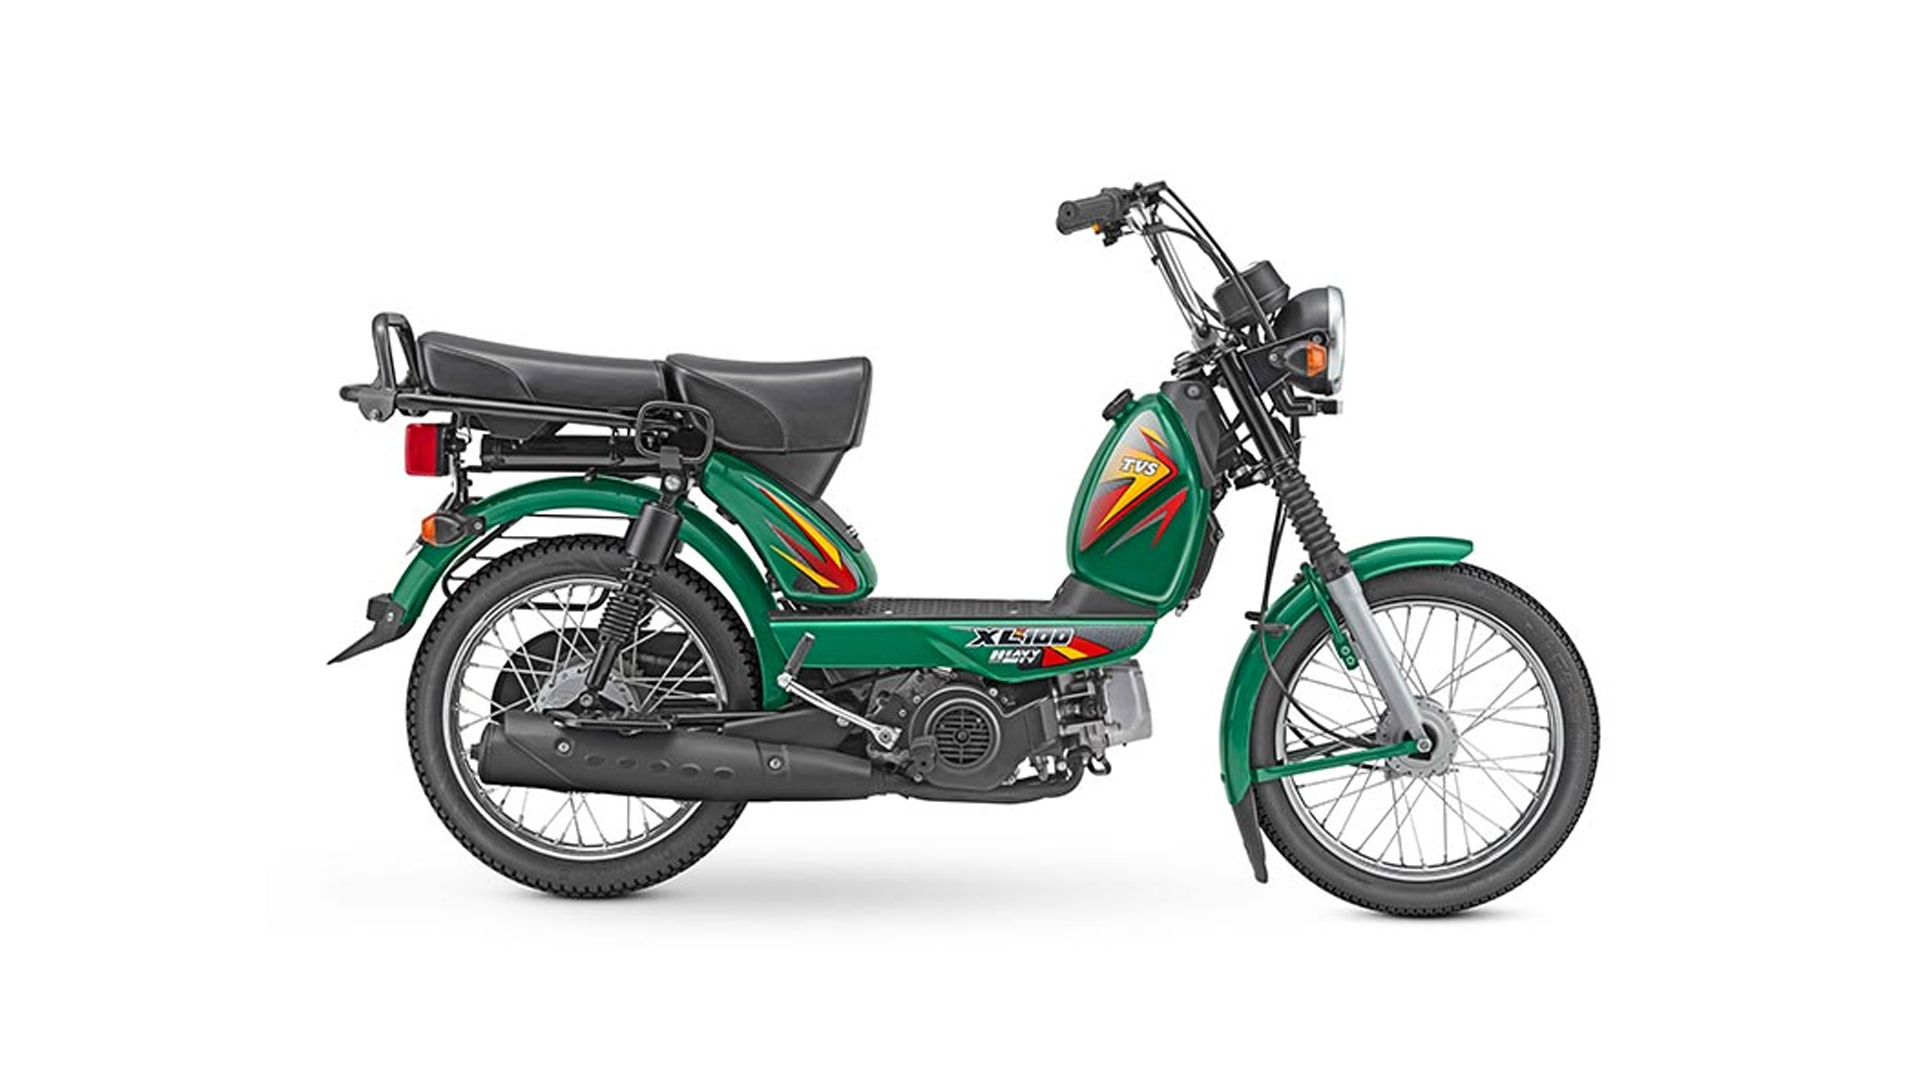 Tvs Xl 100 2020 Price Mileage Reviews Specification Gallery